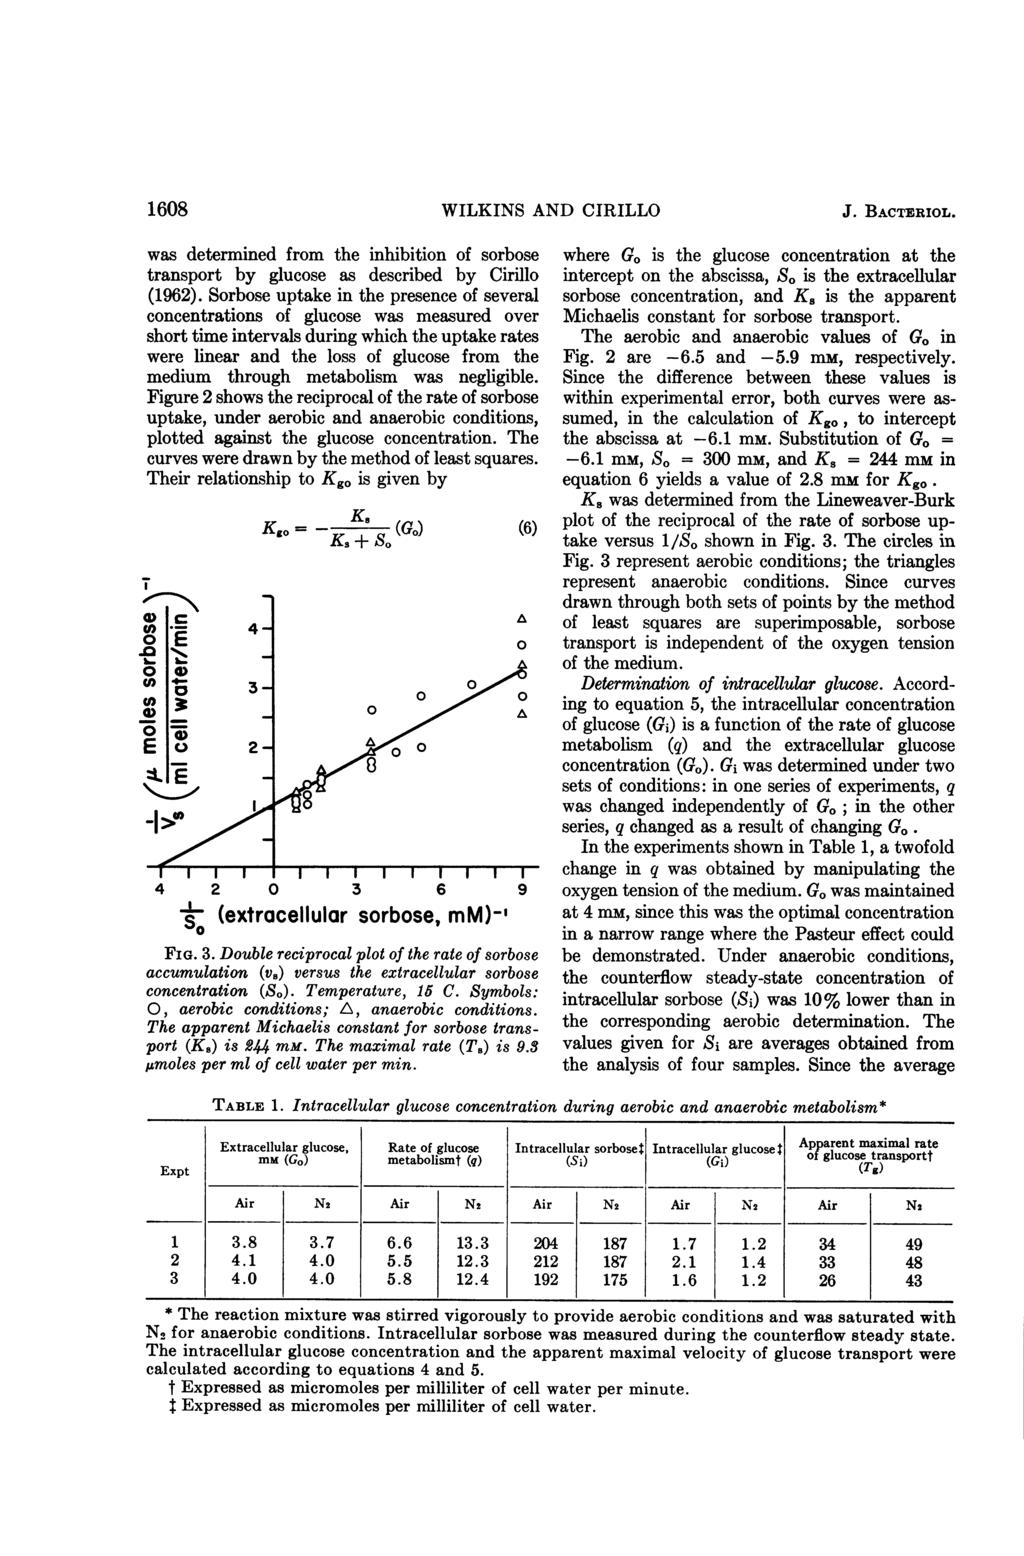 168 WILKINS AND CIRILLO J. BACTRIOL. was determined from the inhibition of sorbose transport by glucose as described by Cirillo (1962).